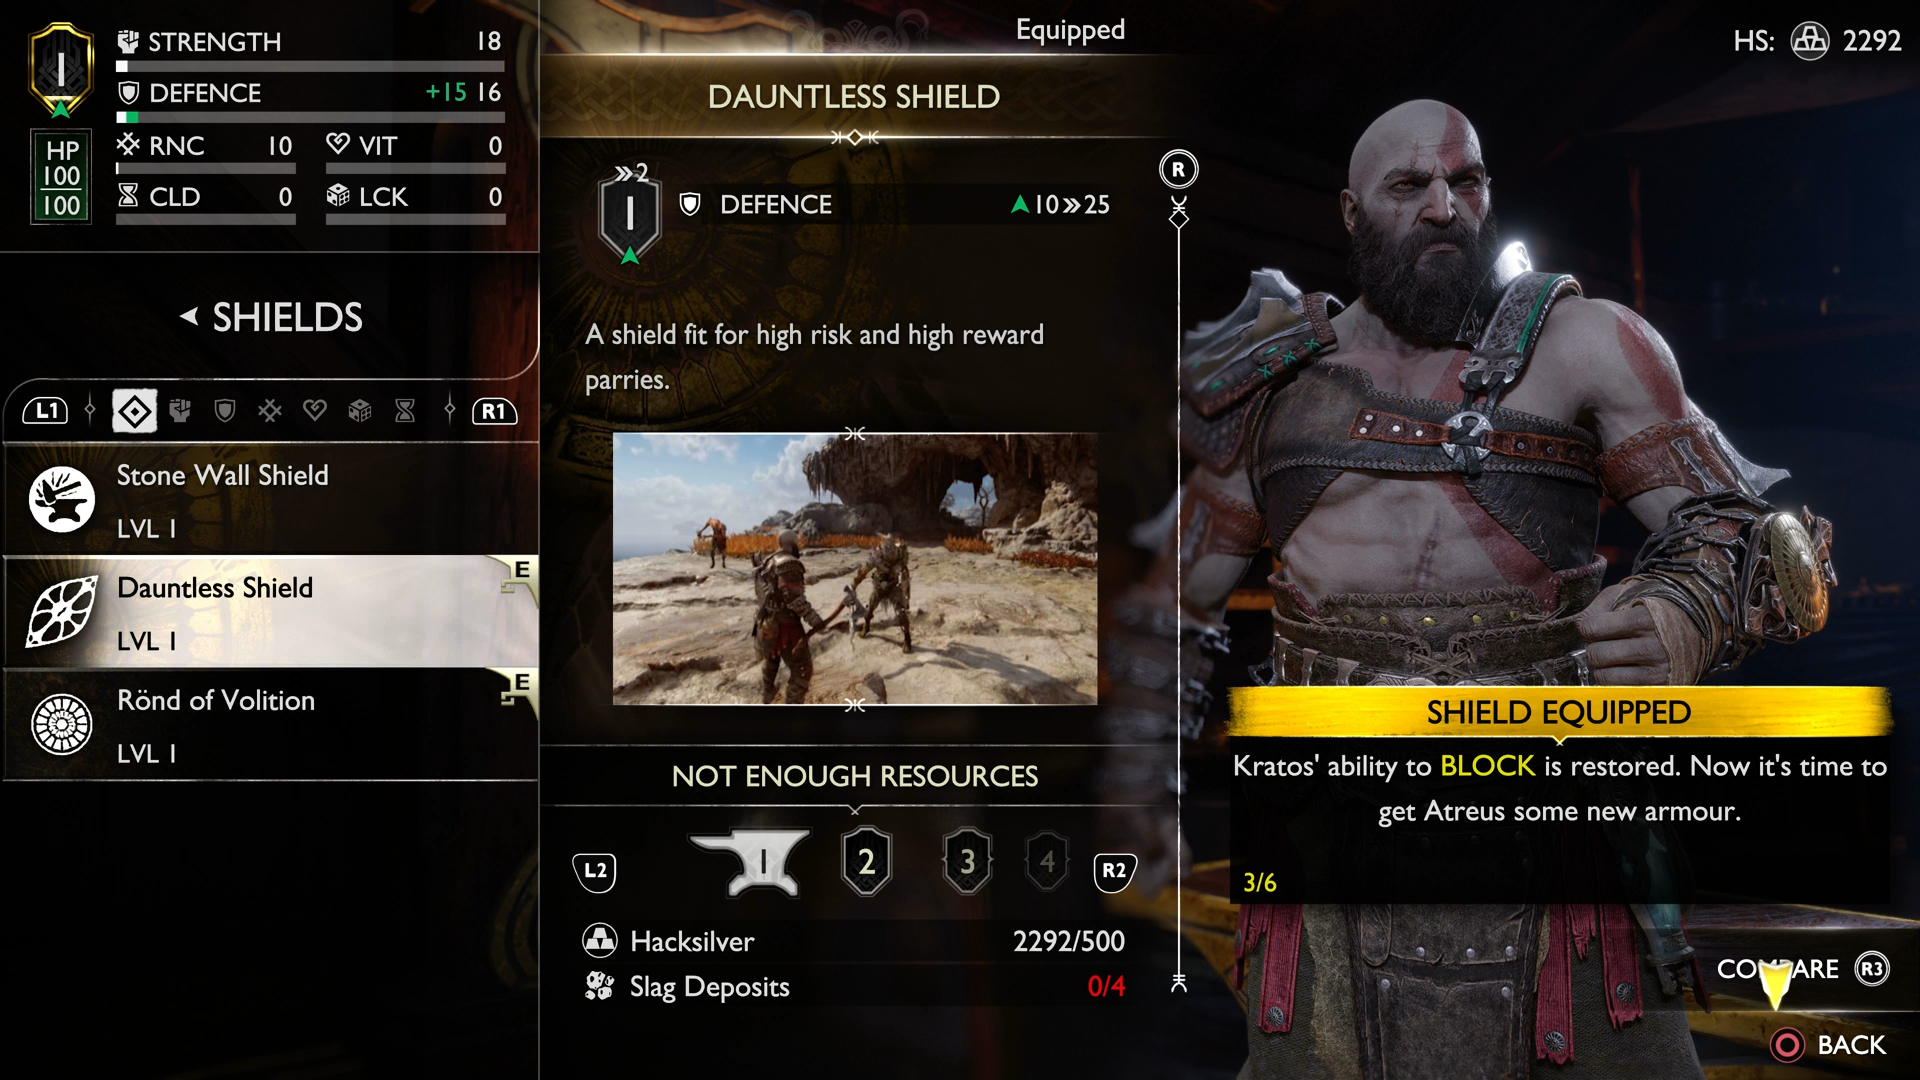 The equipment screen of God of War Ragnarok showing the Stone Wall Shield and Dauntless Shield